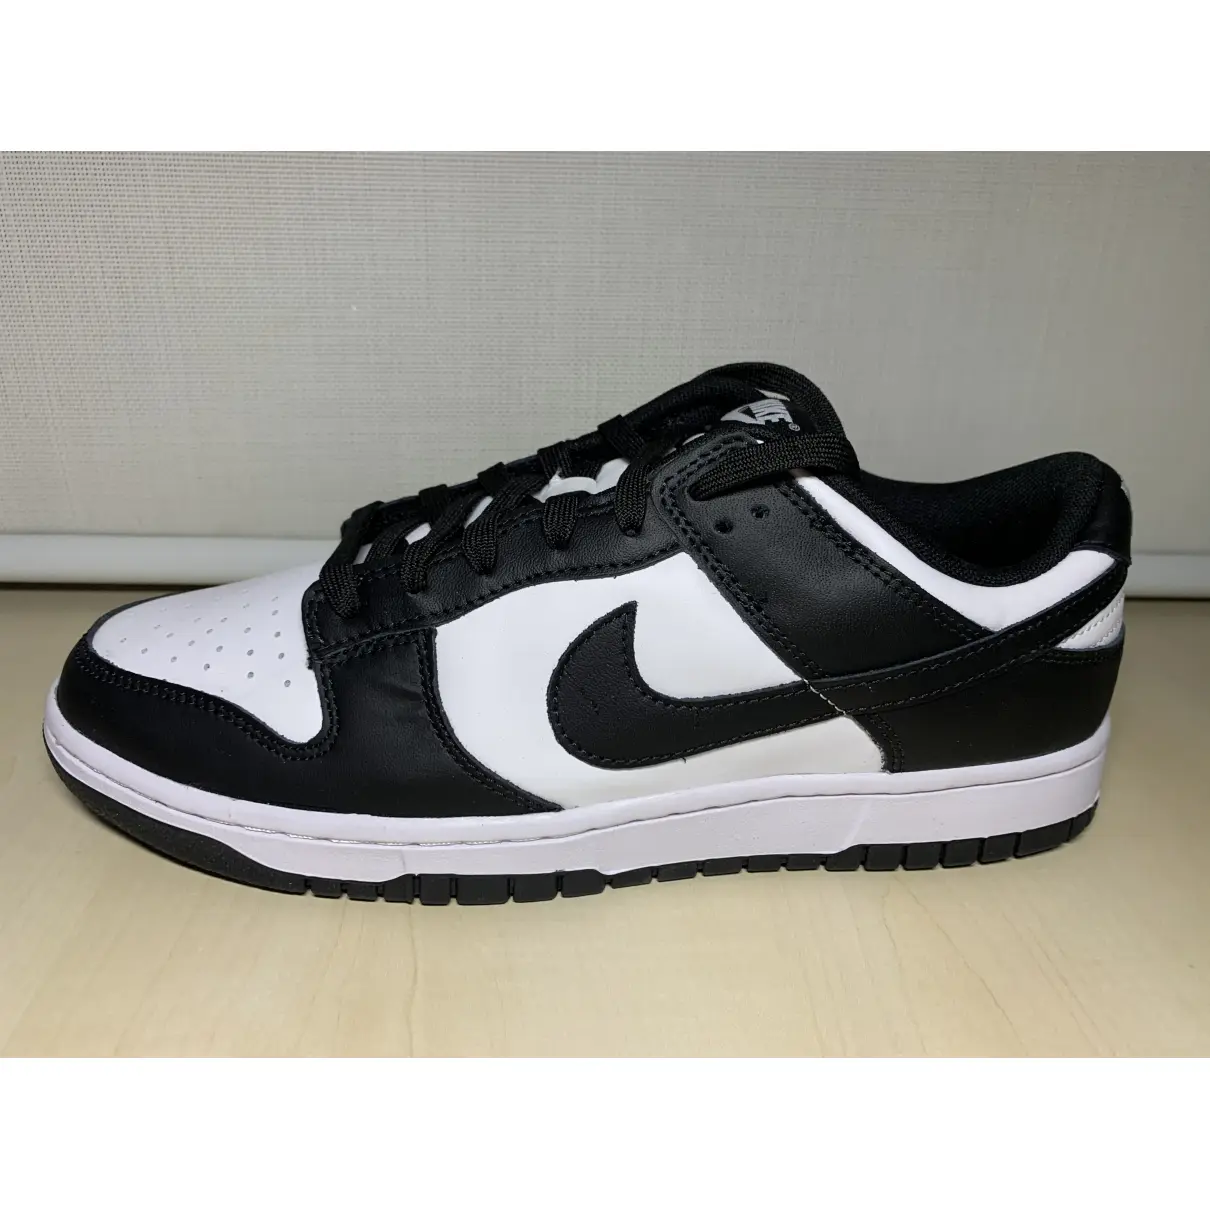 SB Dunk  low trainers Nike